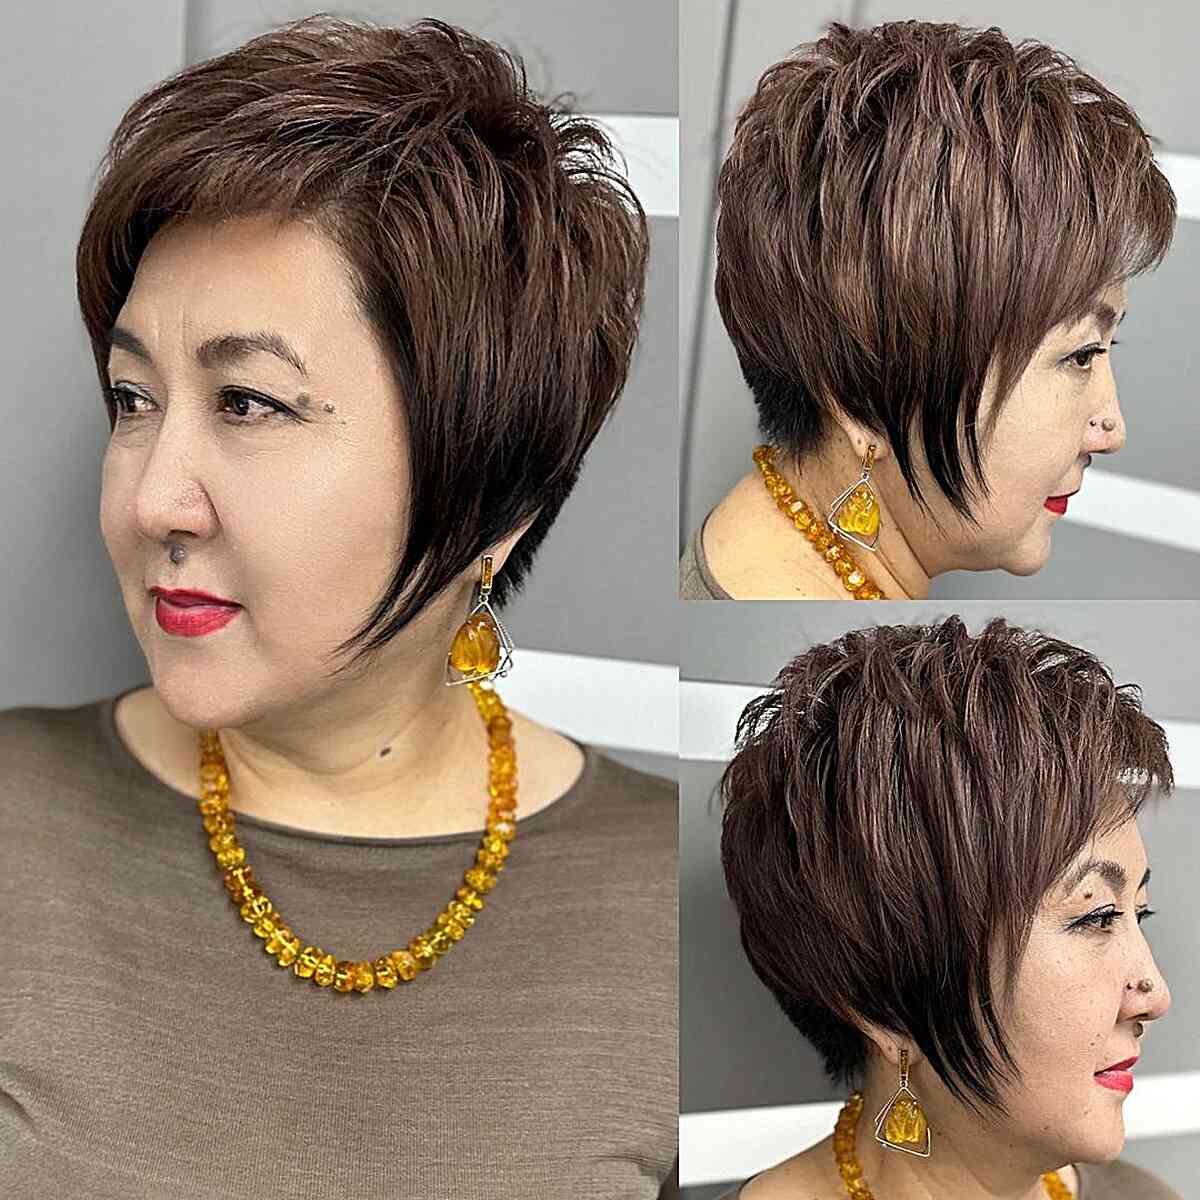 Long Pixie Cut for Older Ladies with Fine Hair